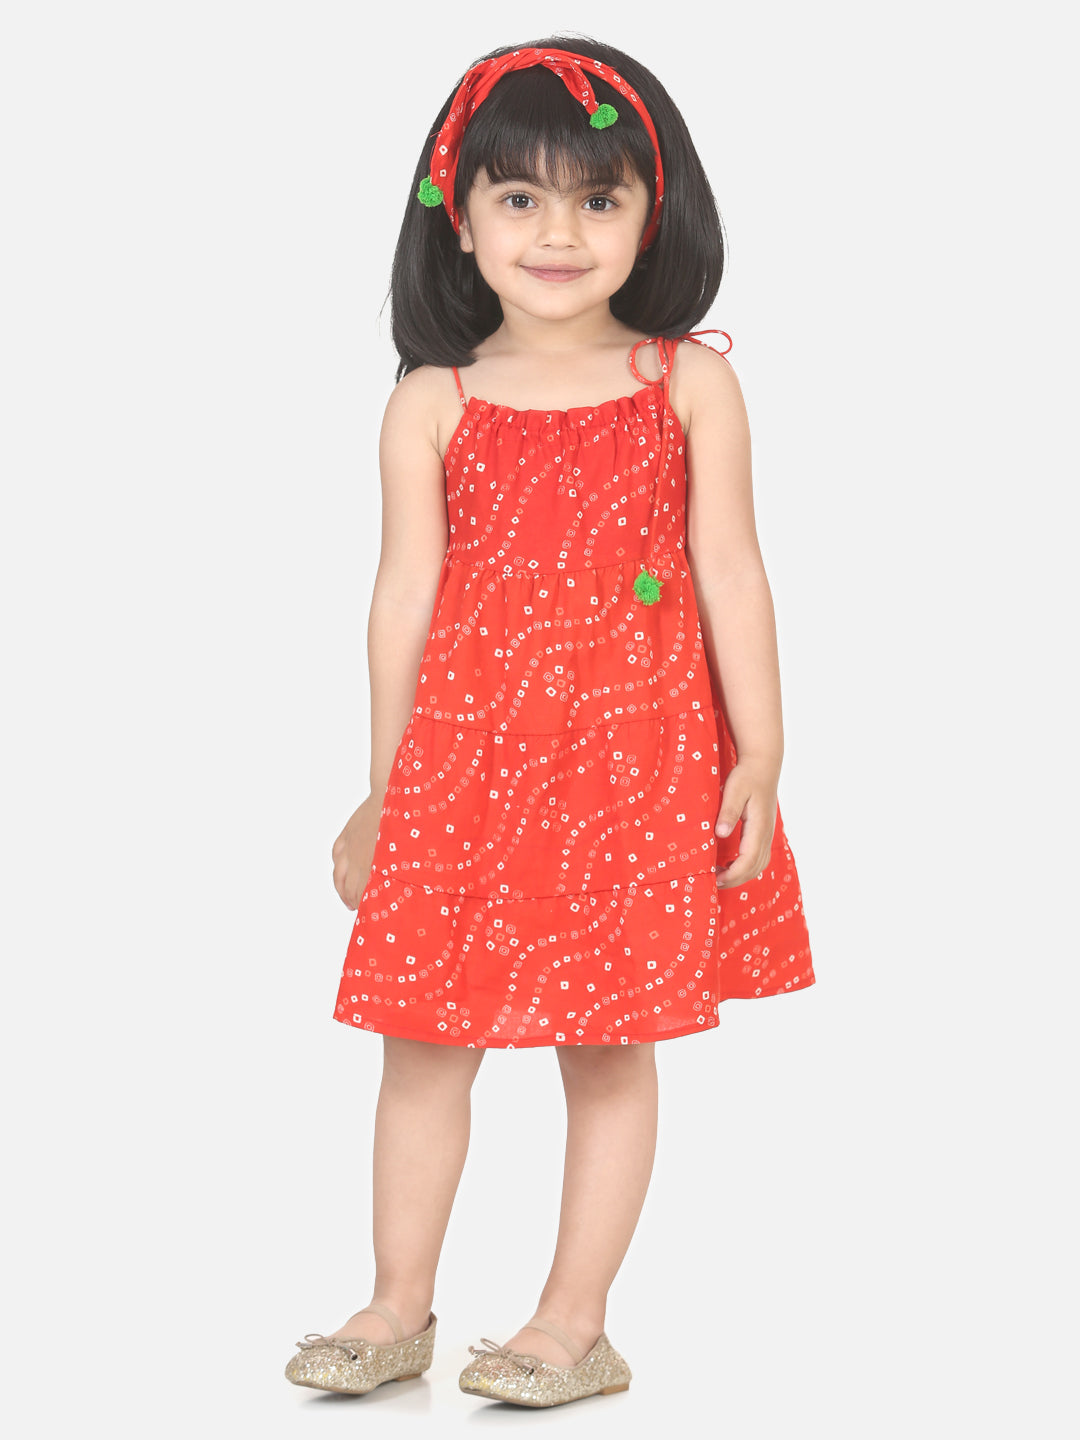 BownBee Bandhani Print Tier Cotton Frock with Headband - Red